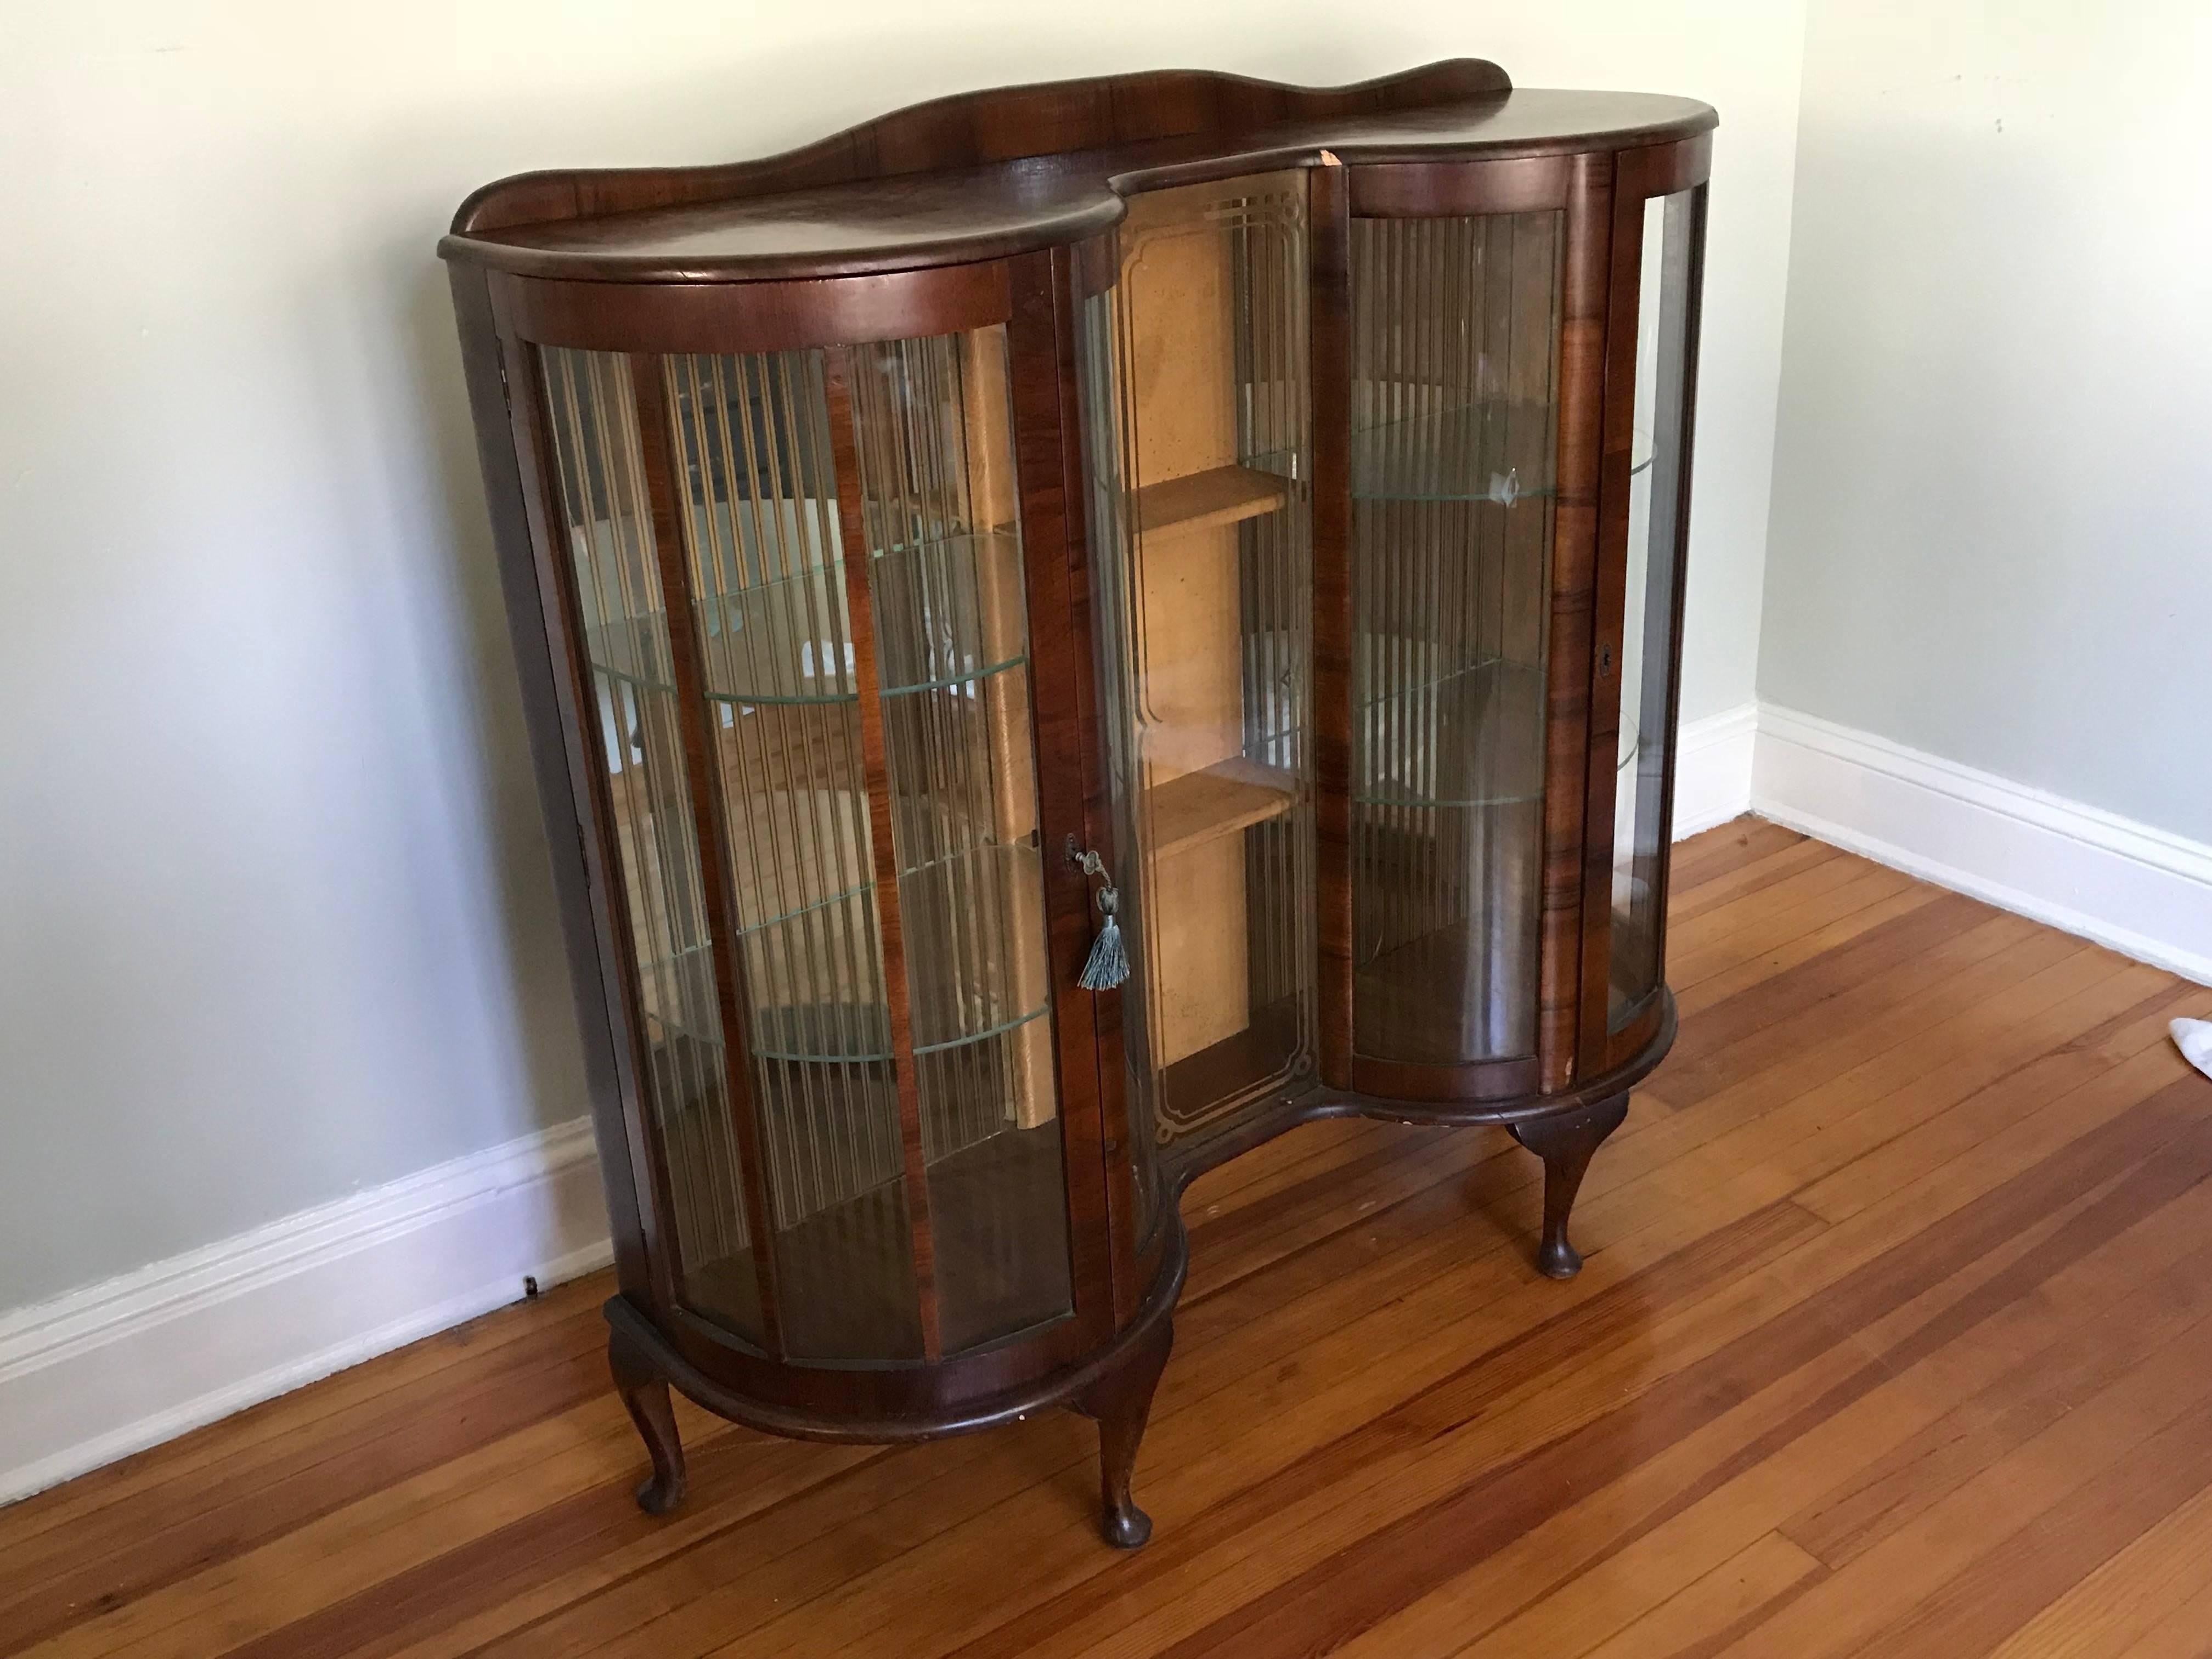 Offered is a beautiful, 1950s English walnut and glass curio display cabinet. The piece had two doors, three levels of shelving, and includes the original key. Marked: 